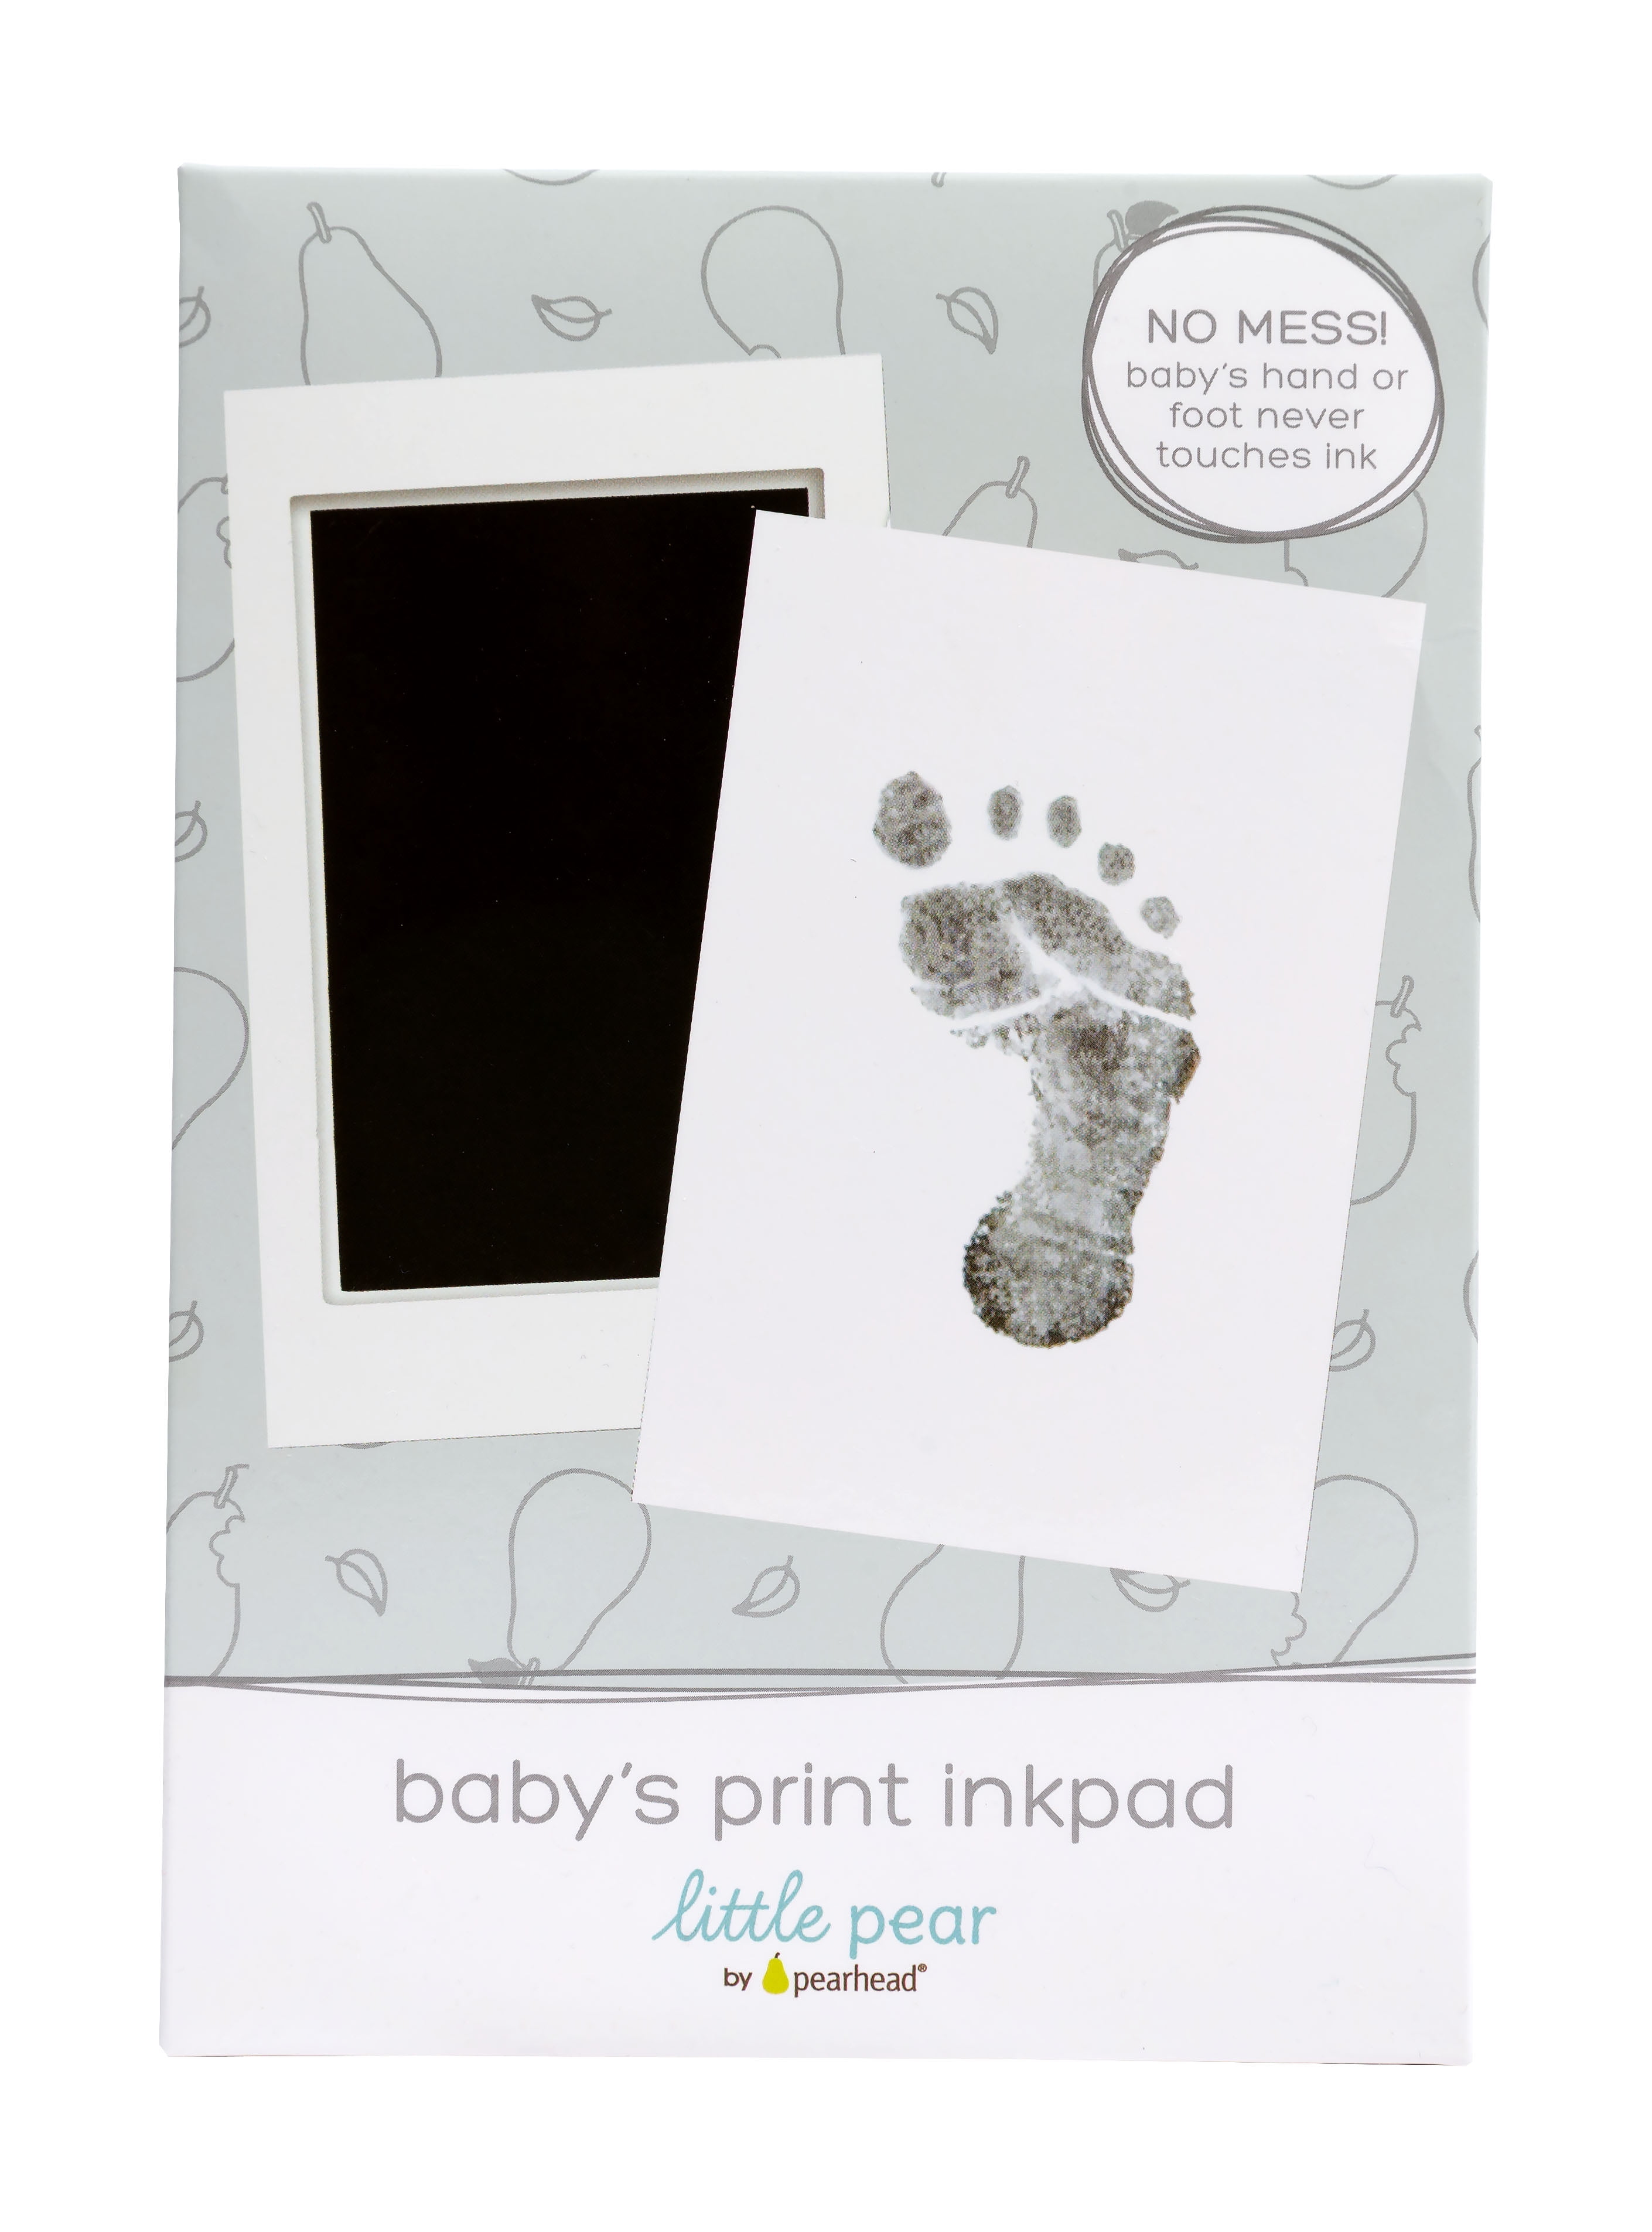 Baby Foot & Hand Print Mold Kit Kids Print Clean Touch Pad Baby